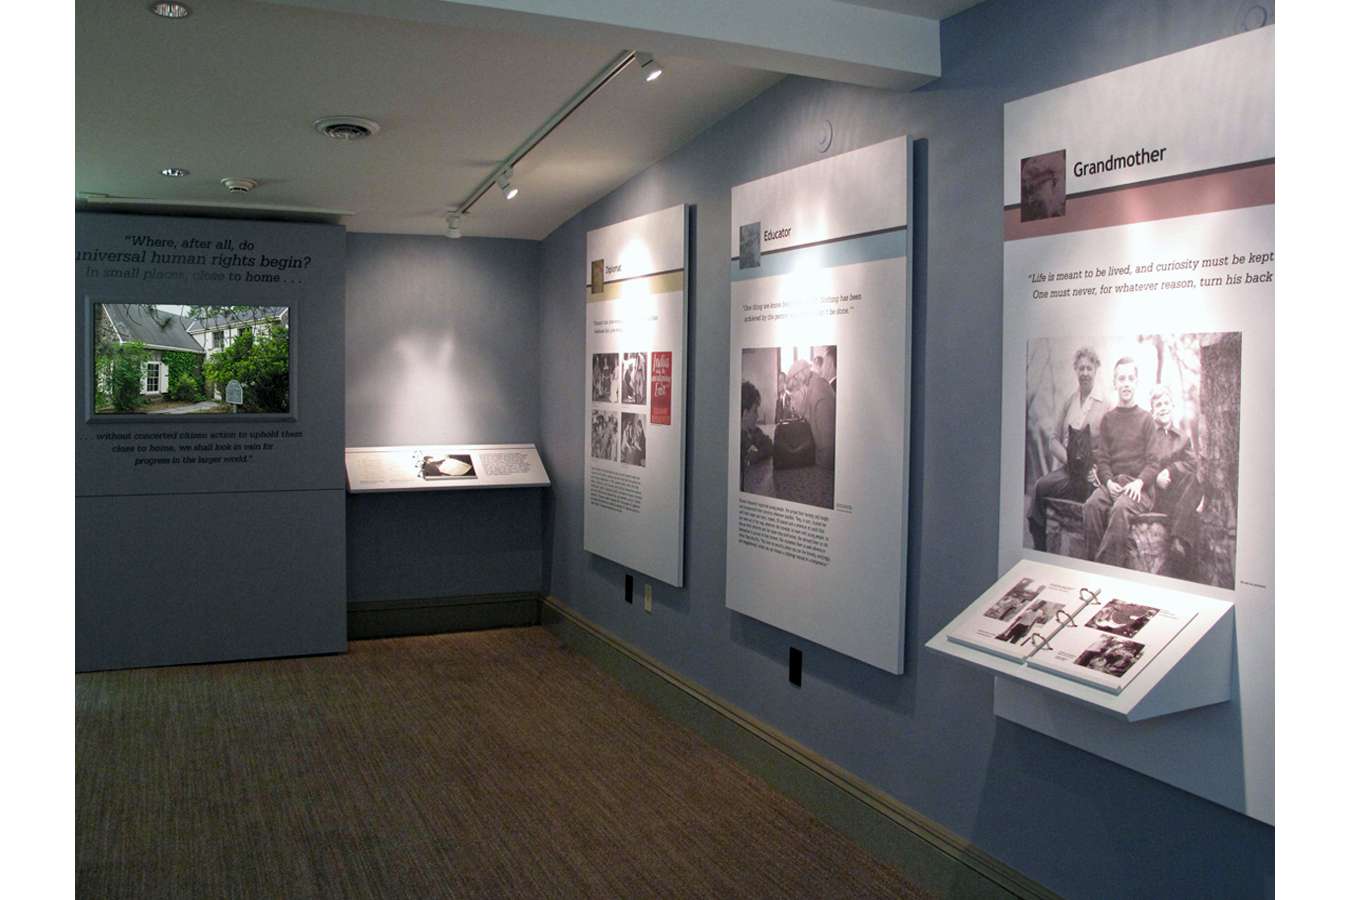 ELROPlayHsRt : Color icons link the key themes of Eleanor Roosevelt's life work through varied exhibit spaces